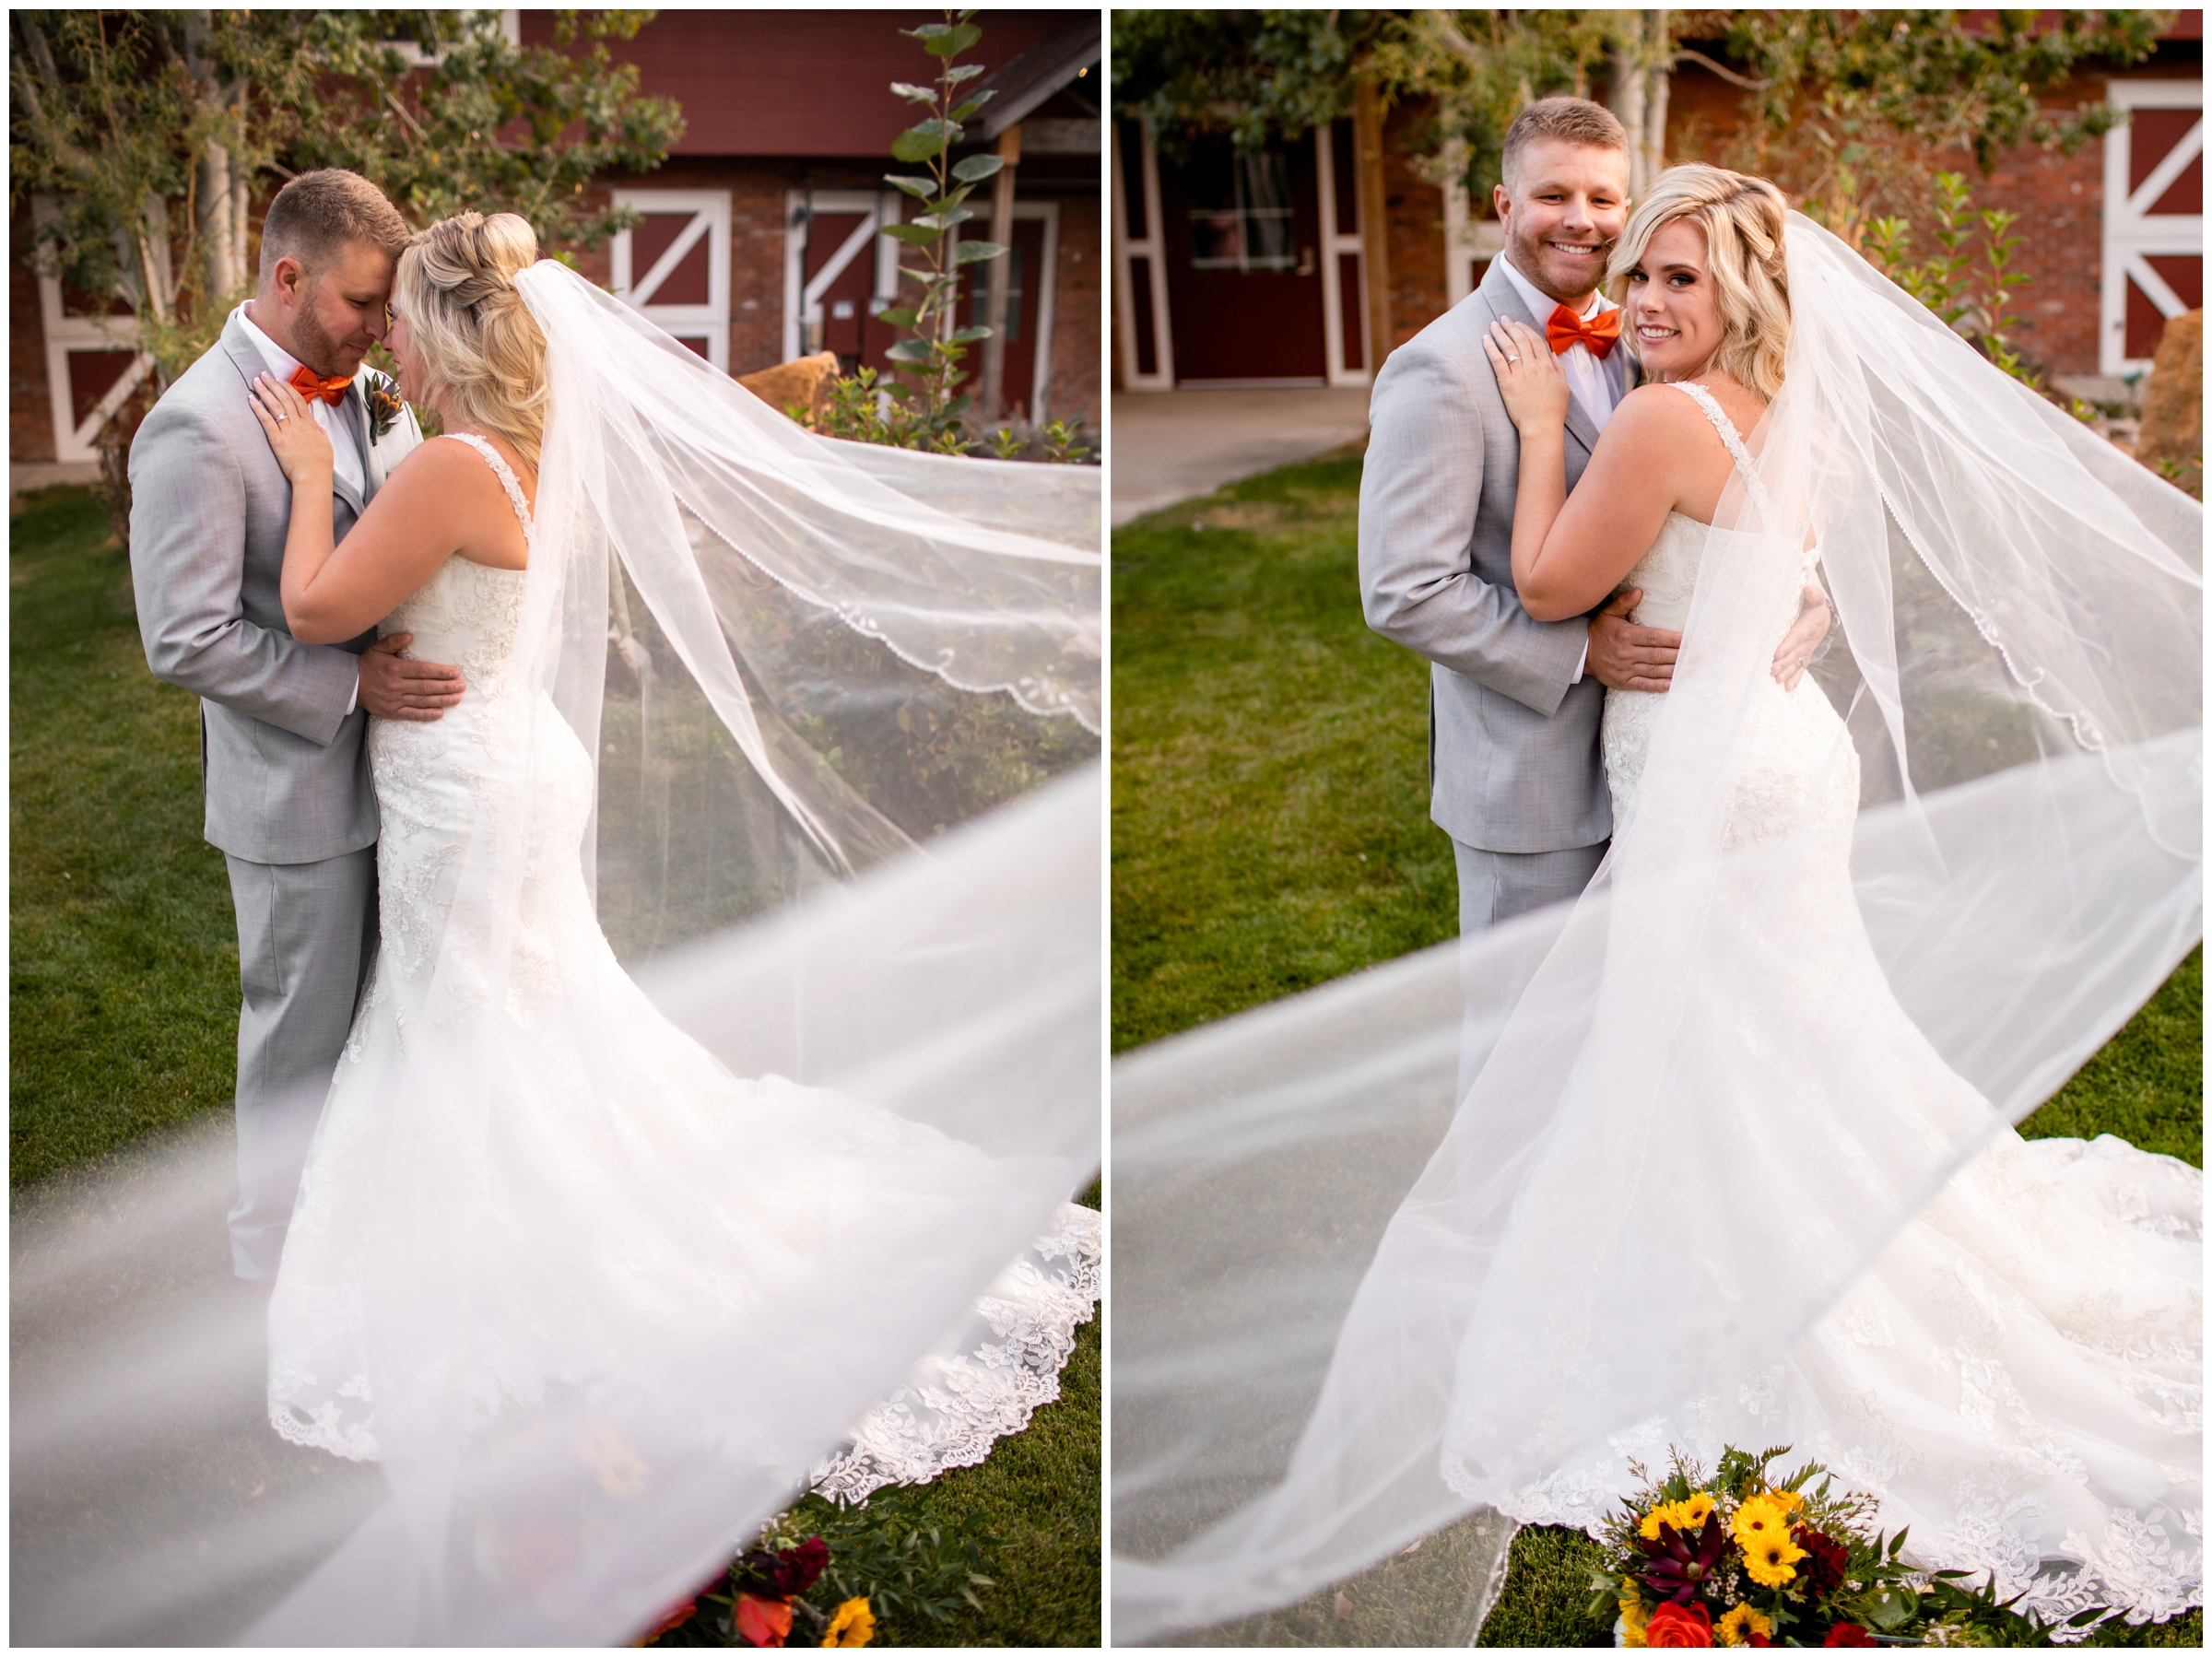 Brookside Gardens wedding pictures by Berthoud Colorado photographer Plum Pretty Photography